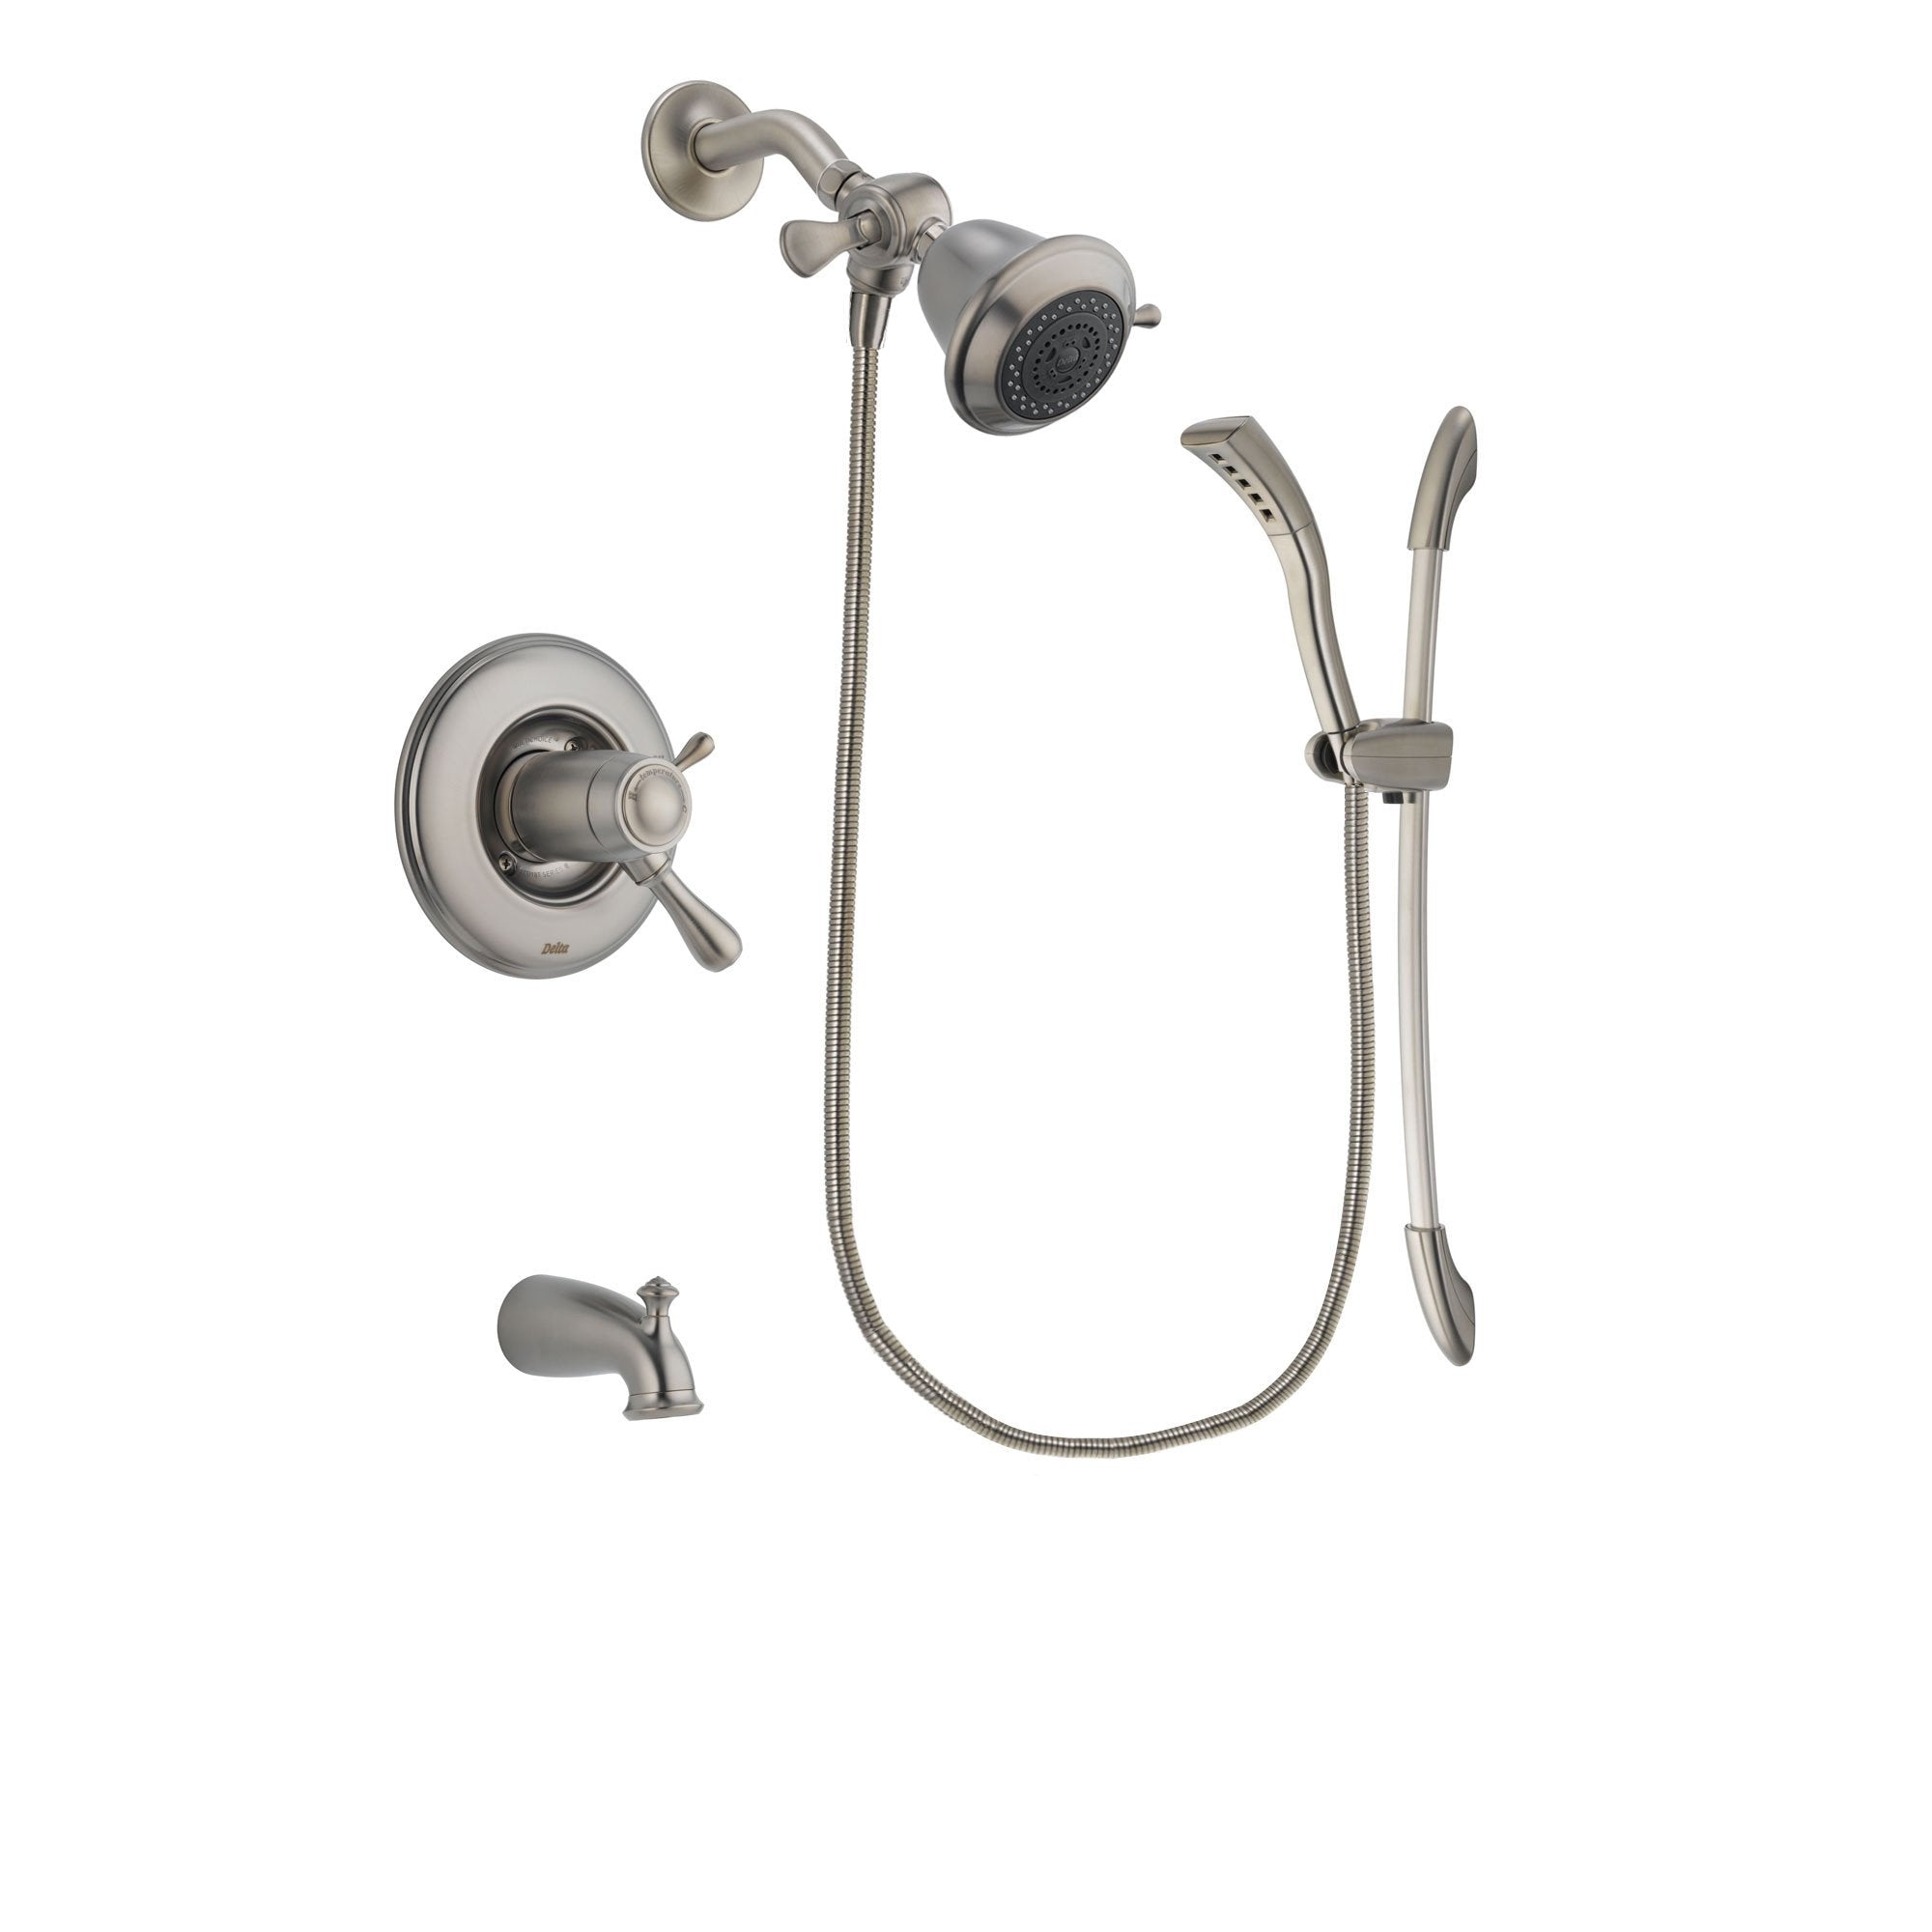 Delta Leland Stainless Steel Finish Thermostatic Tub and Shower Faucet System Package with Shower Head and Handshower with Slide Bar Includes Rough-in Valve and Tub Spout DSP1381V